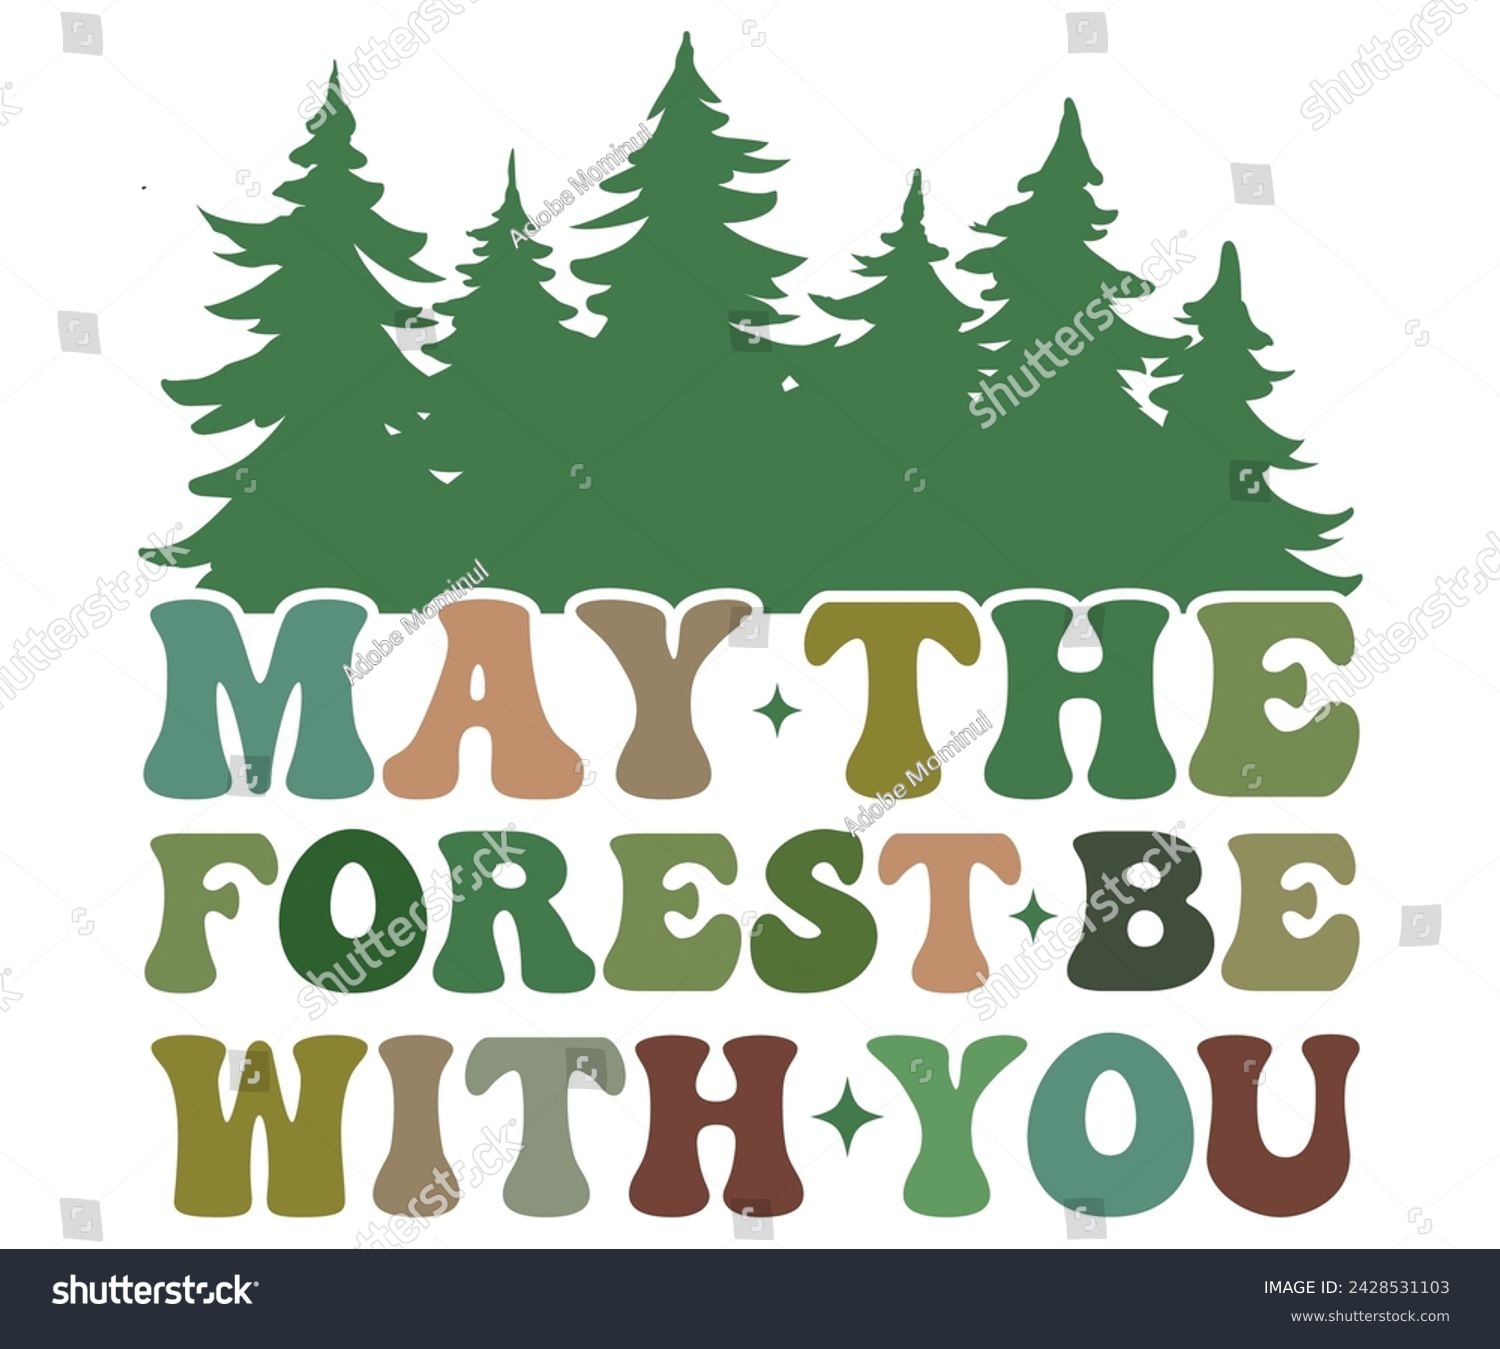 SVG of May The Forest Be With You Svg,Happy Camper Svg,Camping Svg,Adventure Svg,Hiking Svg,Camp Saying,Camp Life Svg,Svg Cut Files, Png,Mountain T-shirt,Instant Download svg